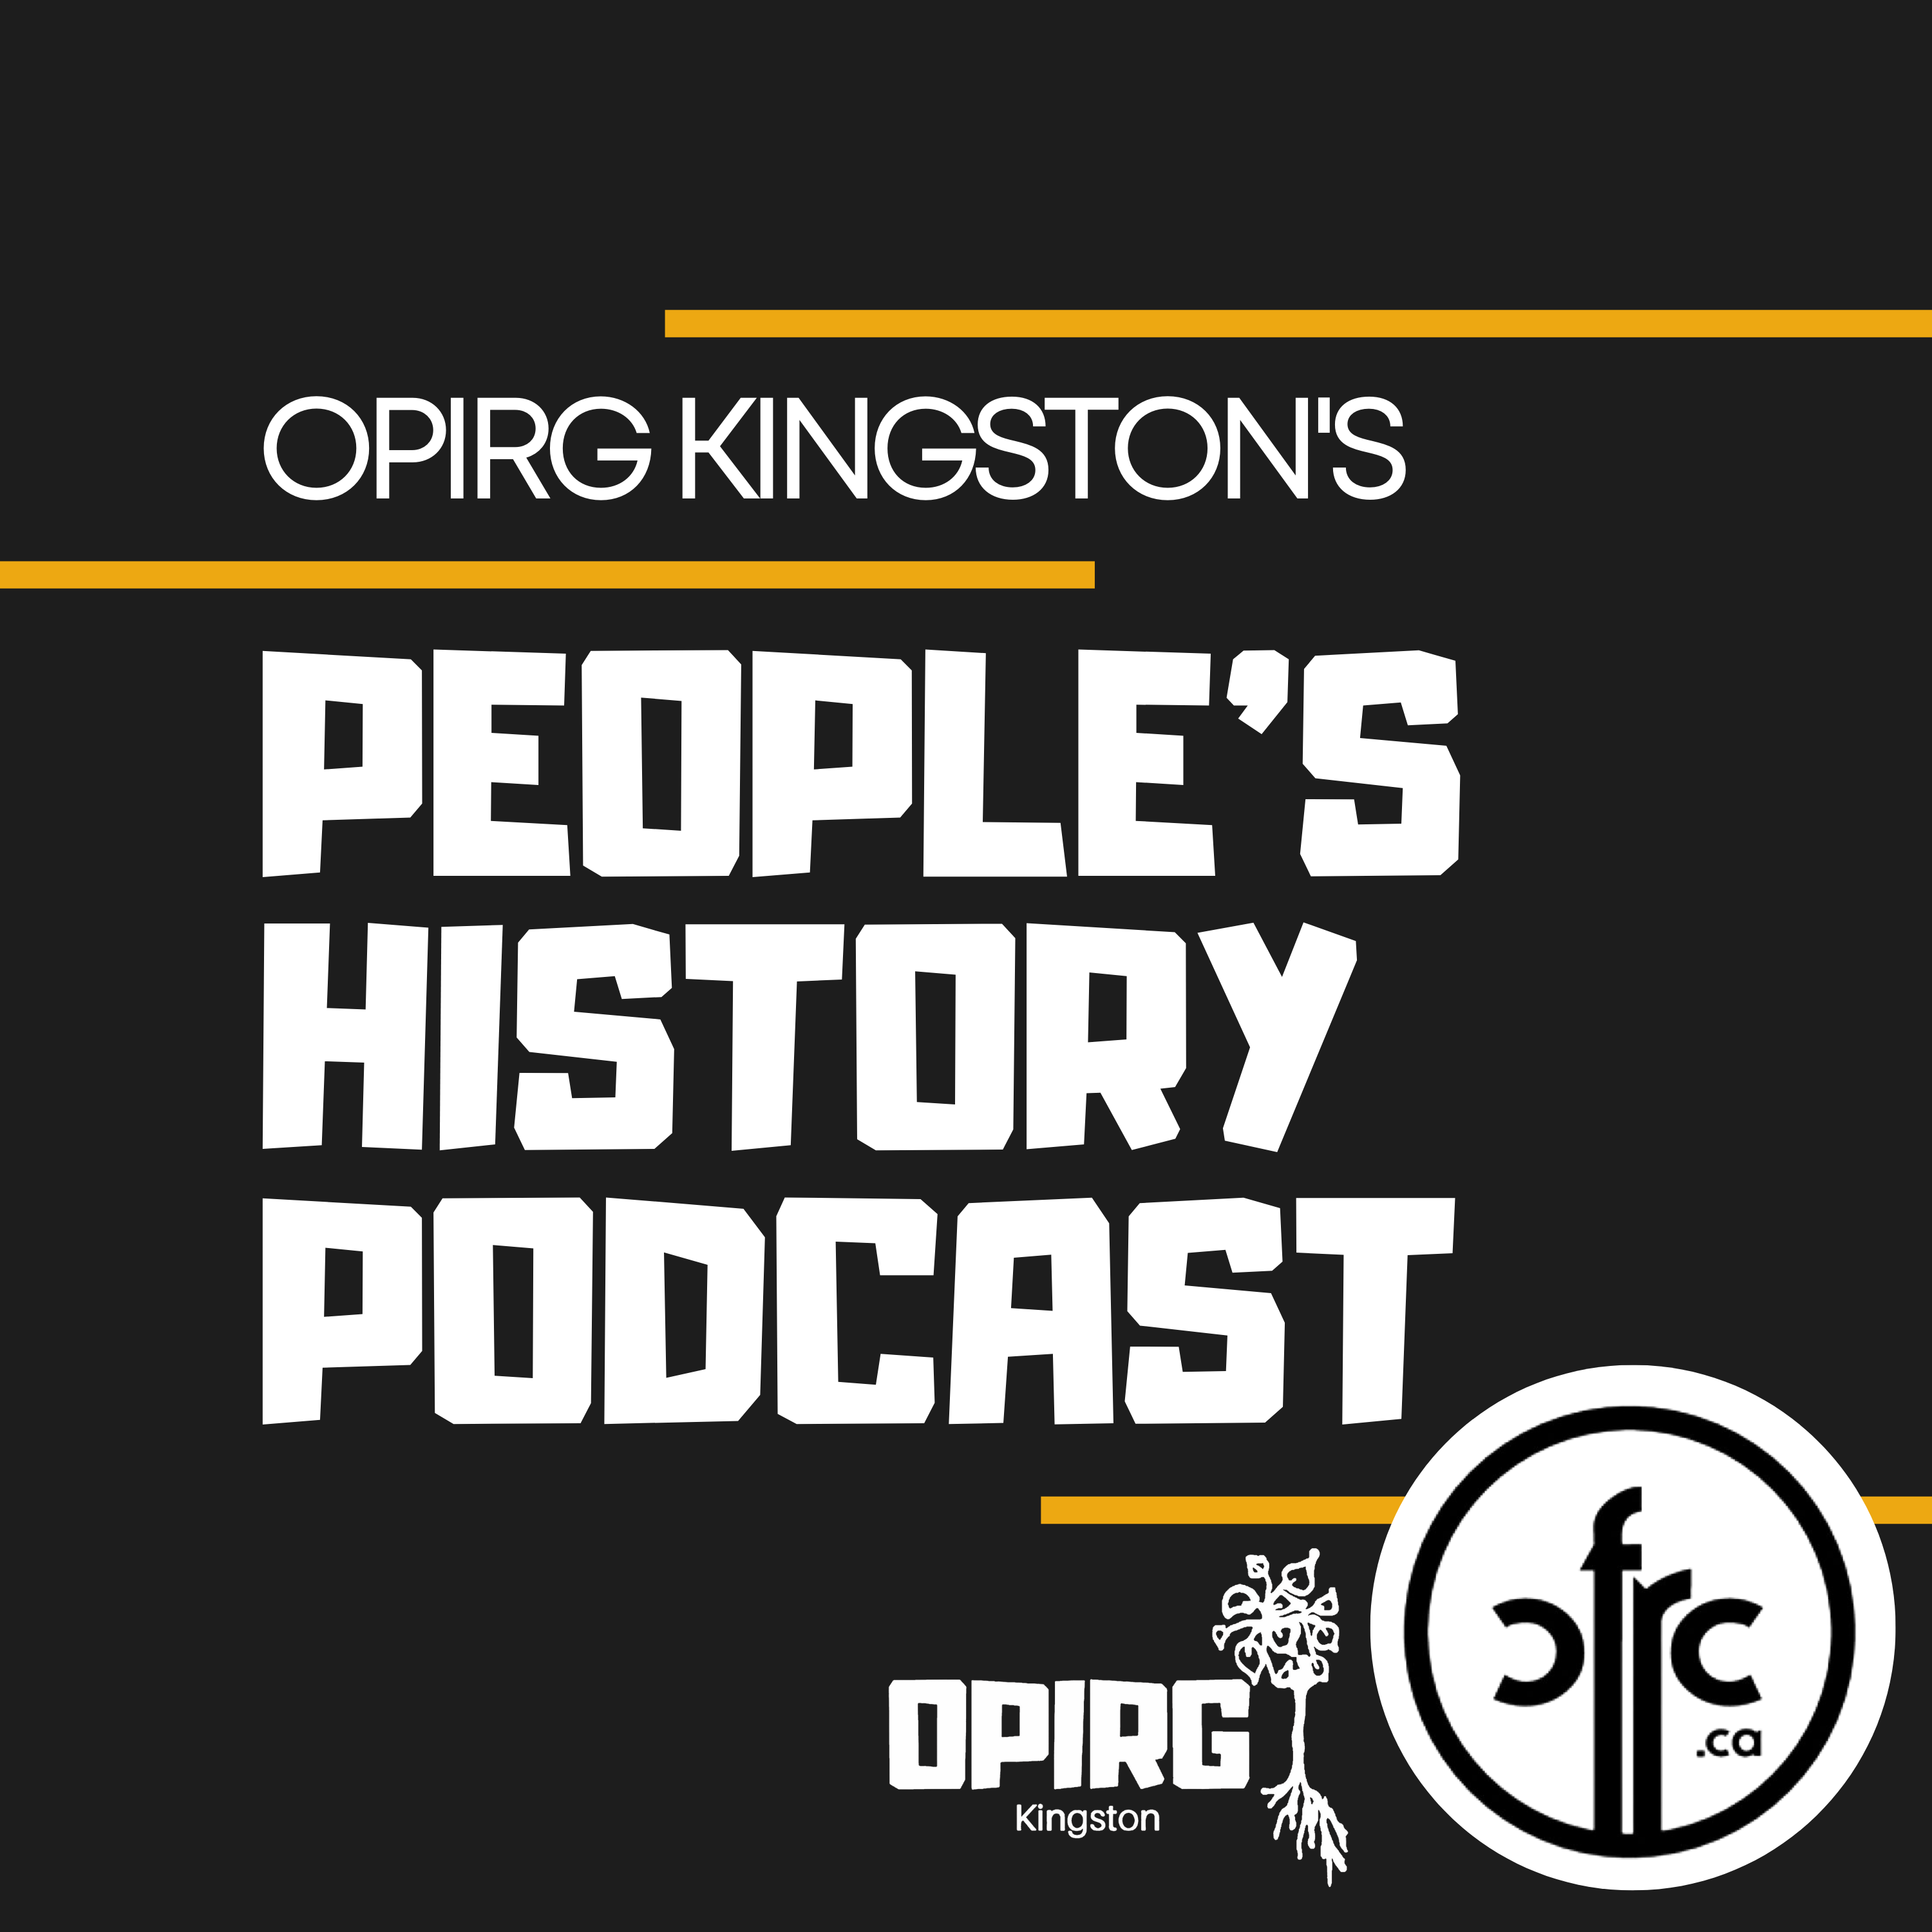 OPIRG Kingston's People's History Podcast